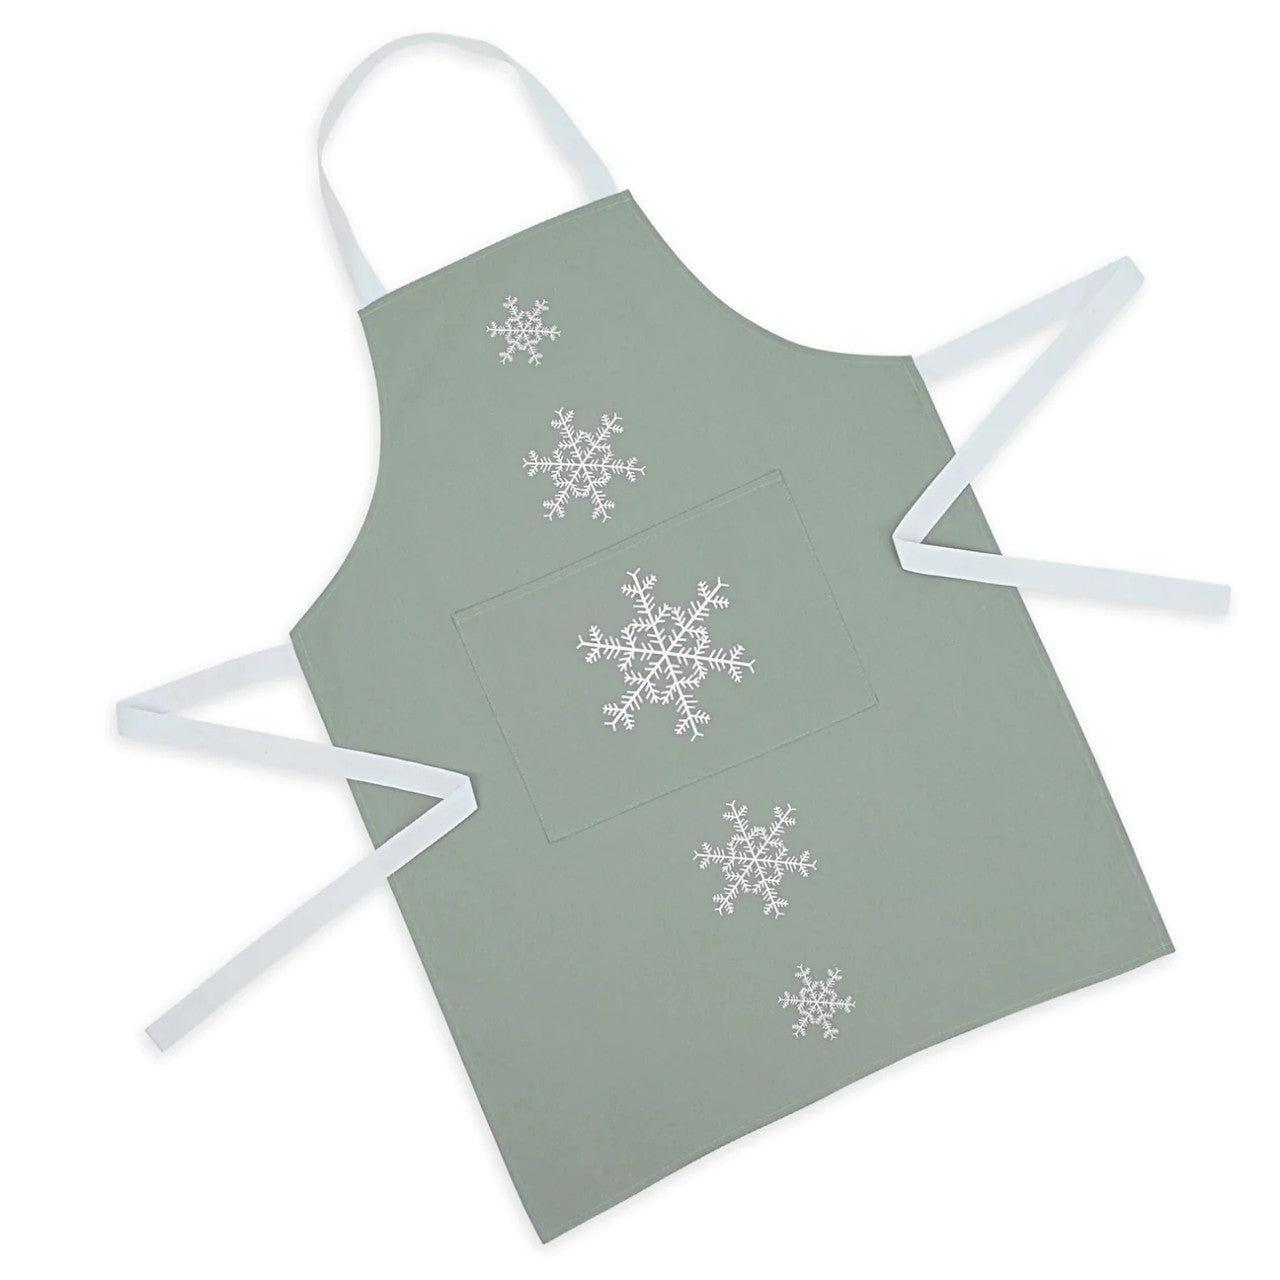 Snowflake cotton apron from Ulster Weavers.